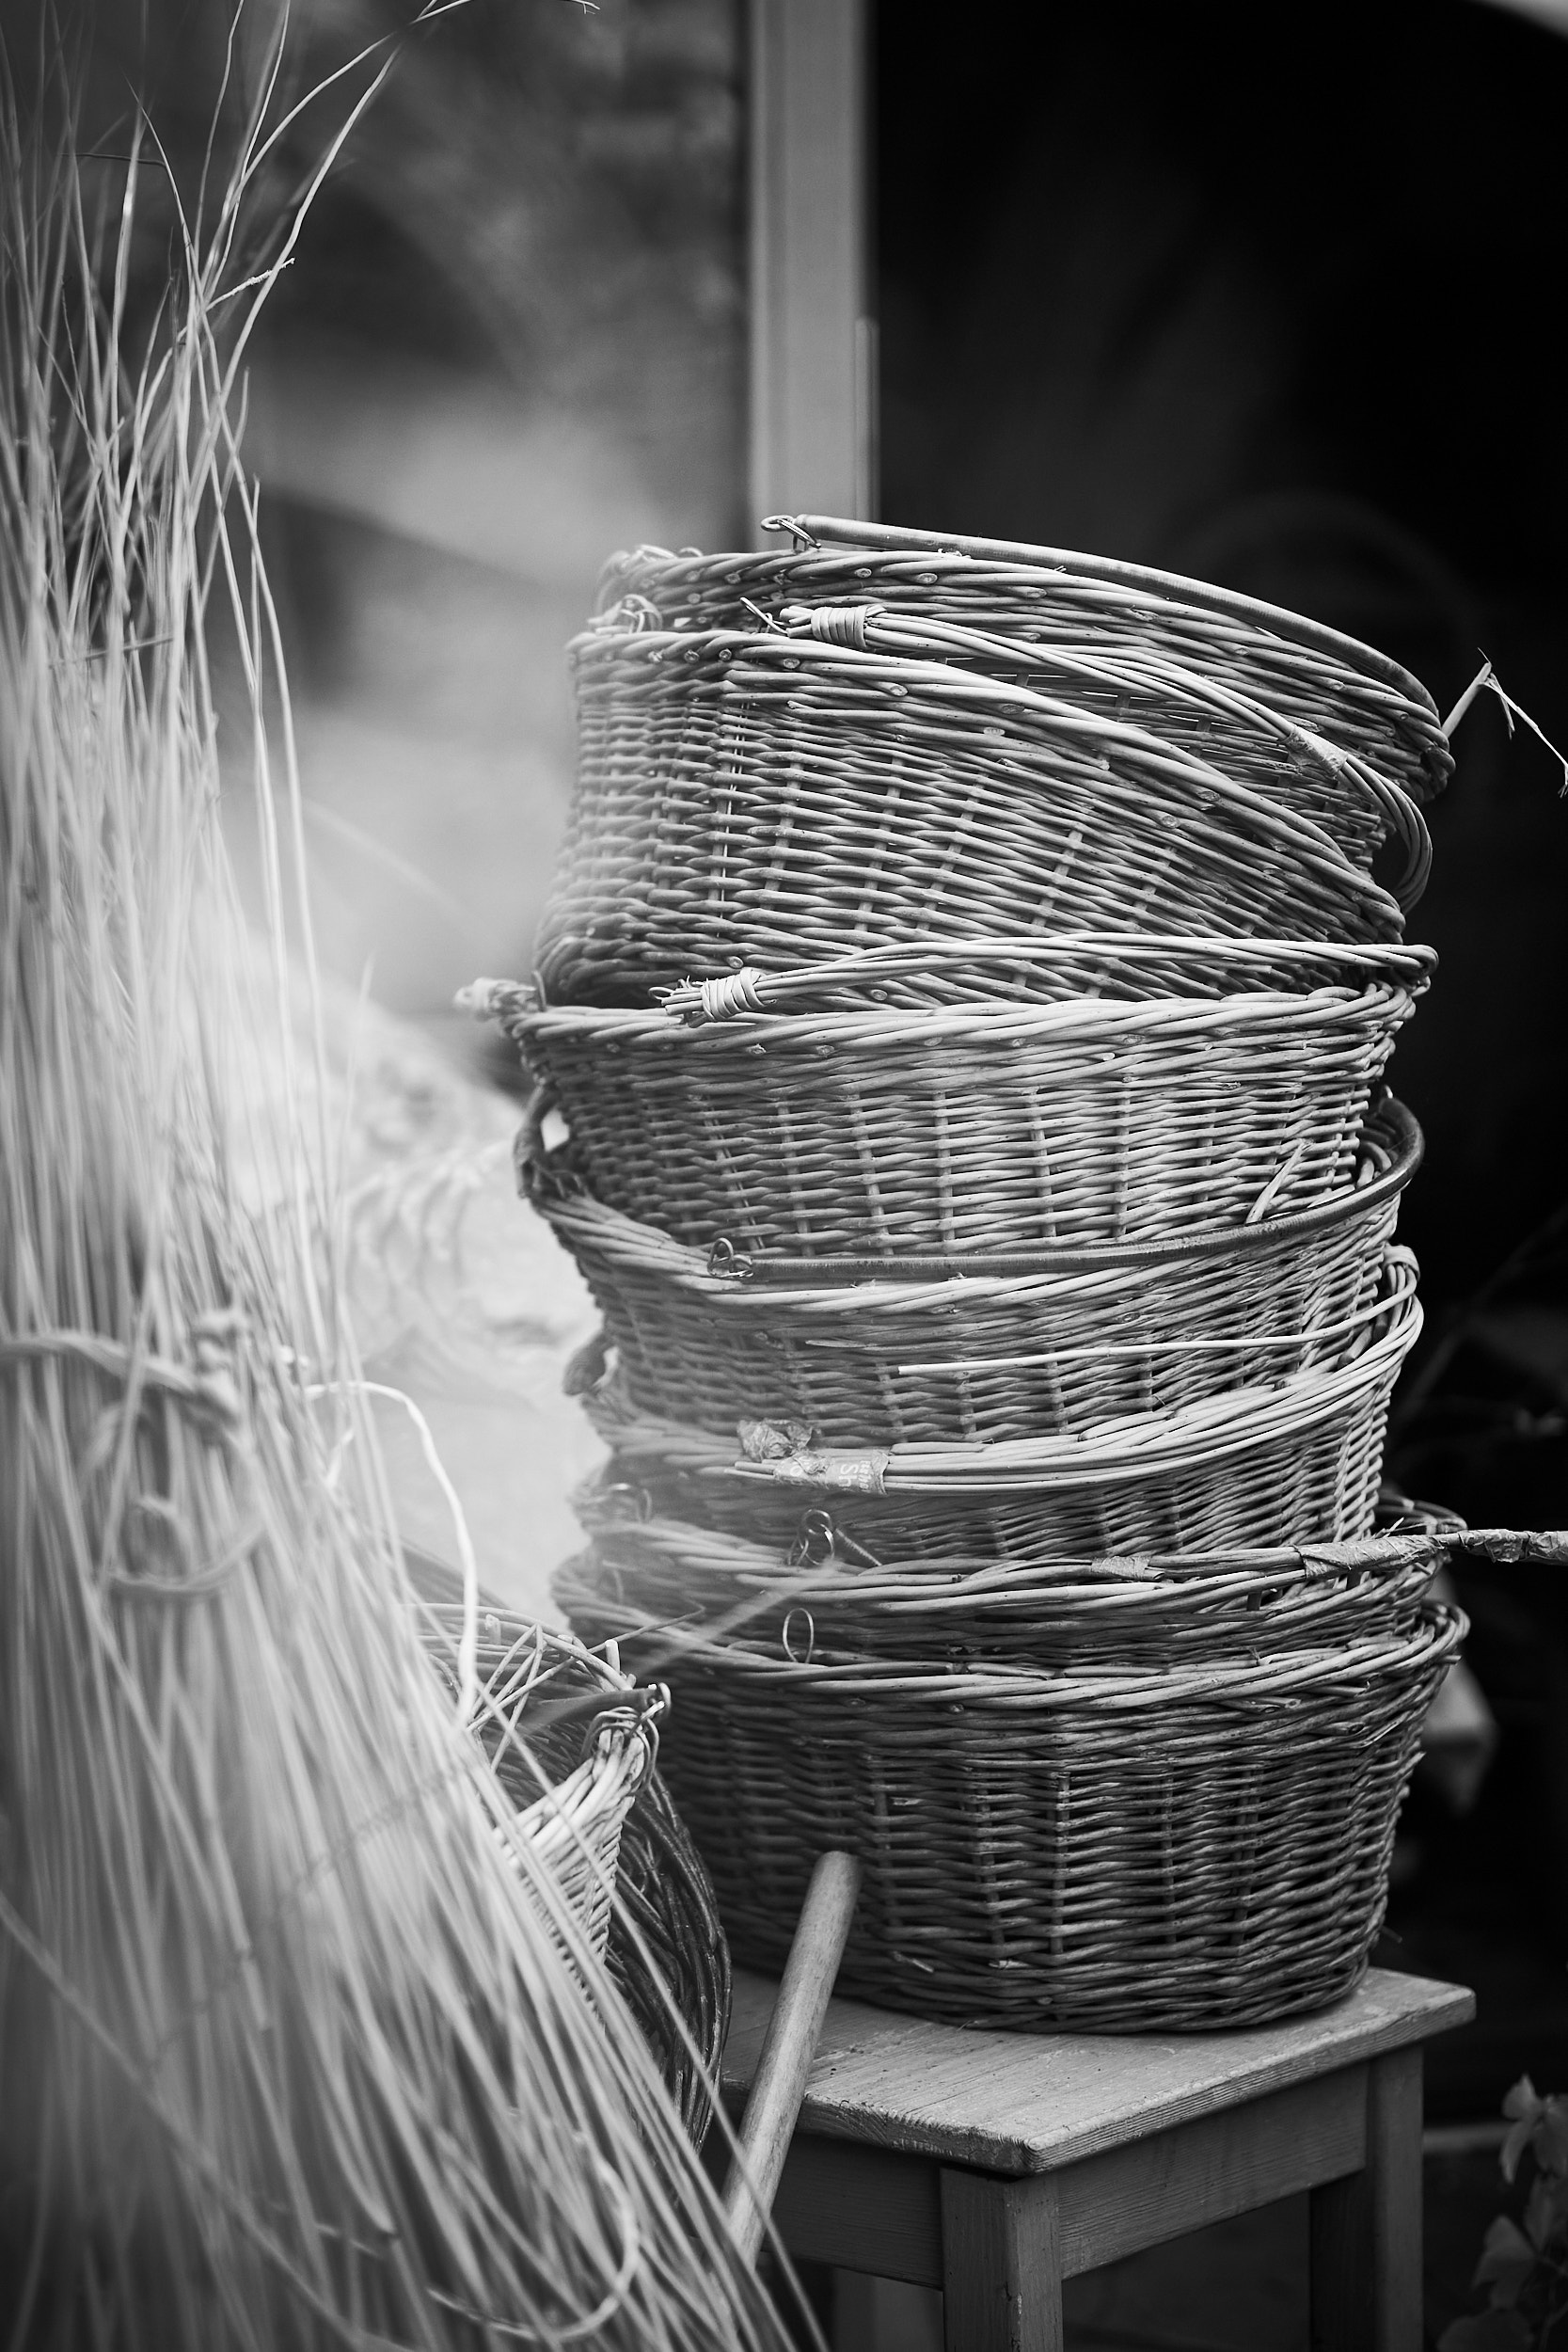 English willow baskets